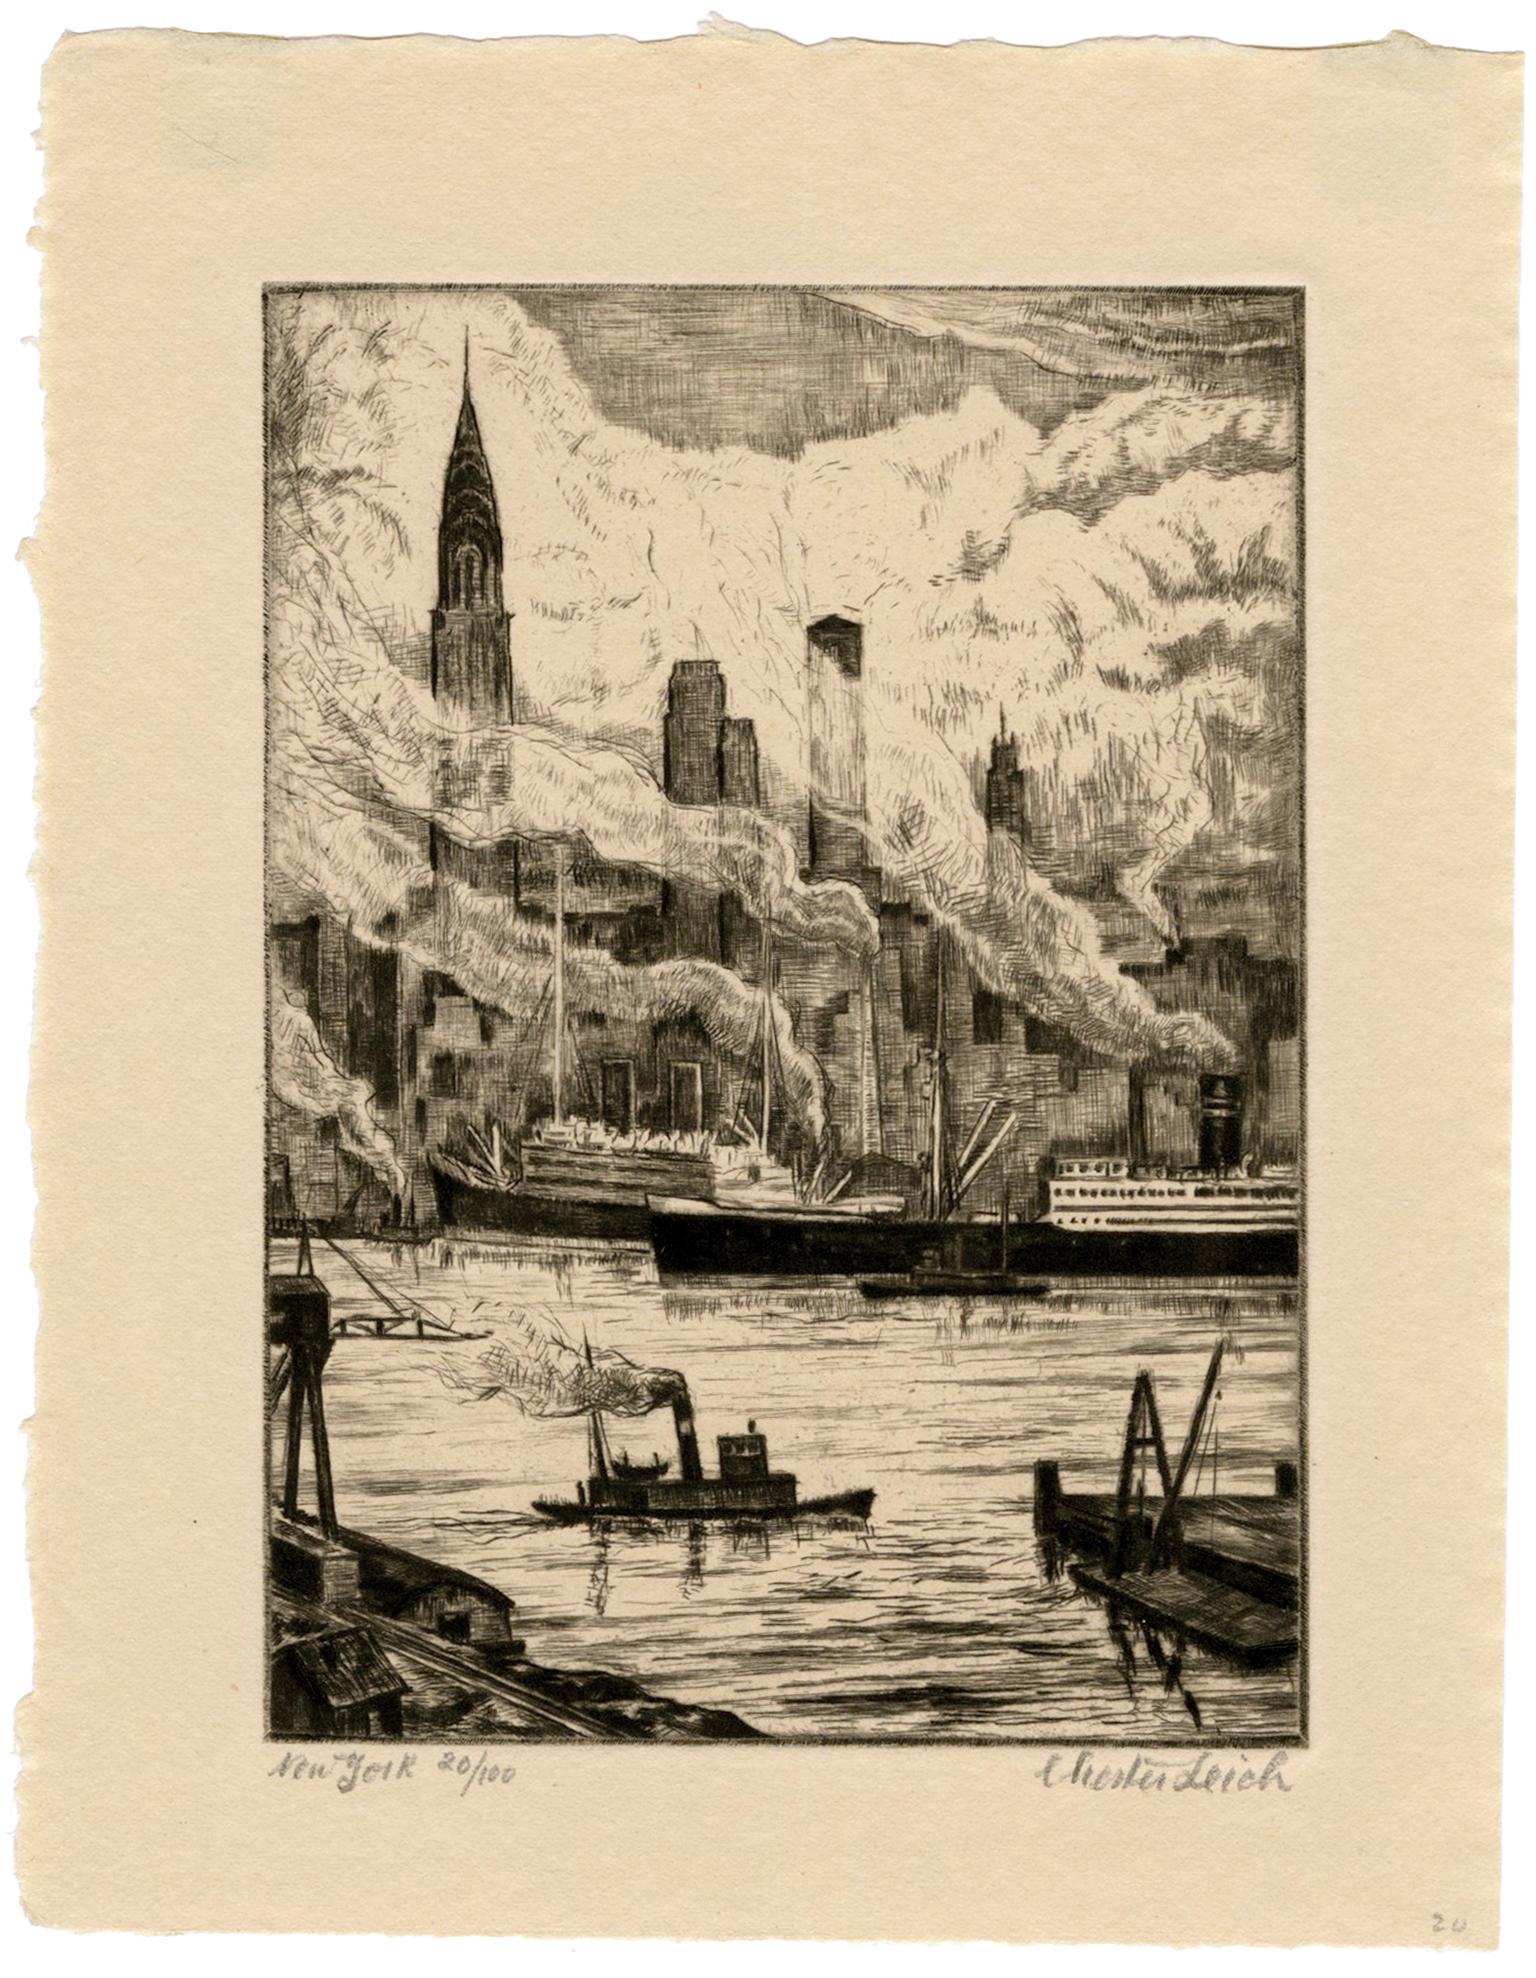 'New York' — 1930s American Scene Etching - Print by Chester Leich